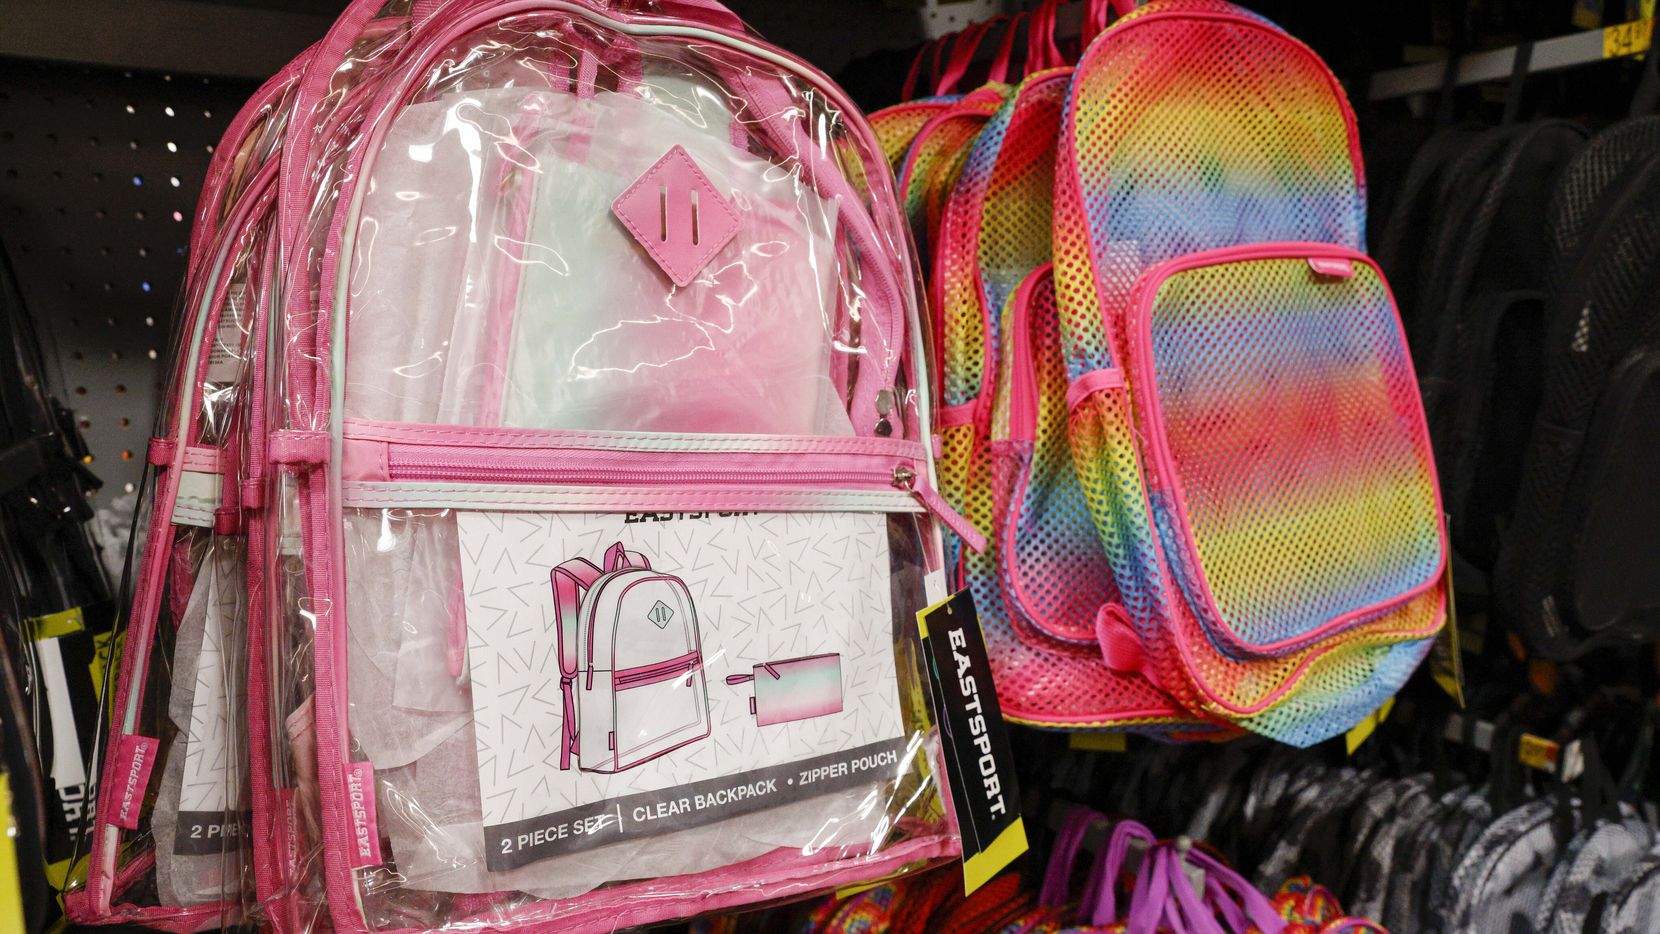 Clear and mesh backpacks priced at $11.89 each filledpart of an aisle of school supplies at...